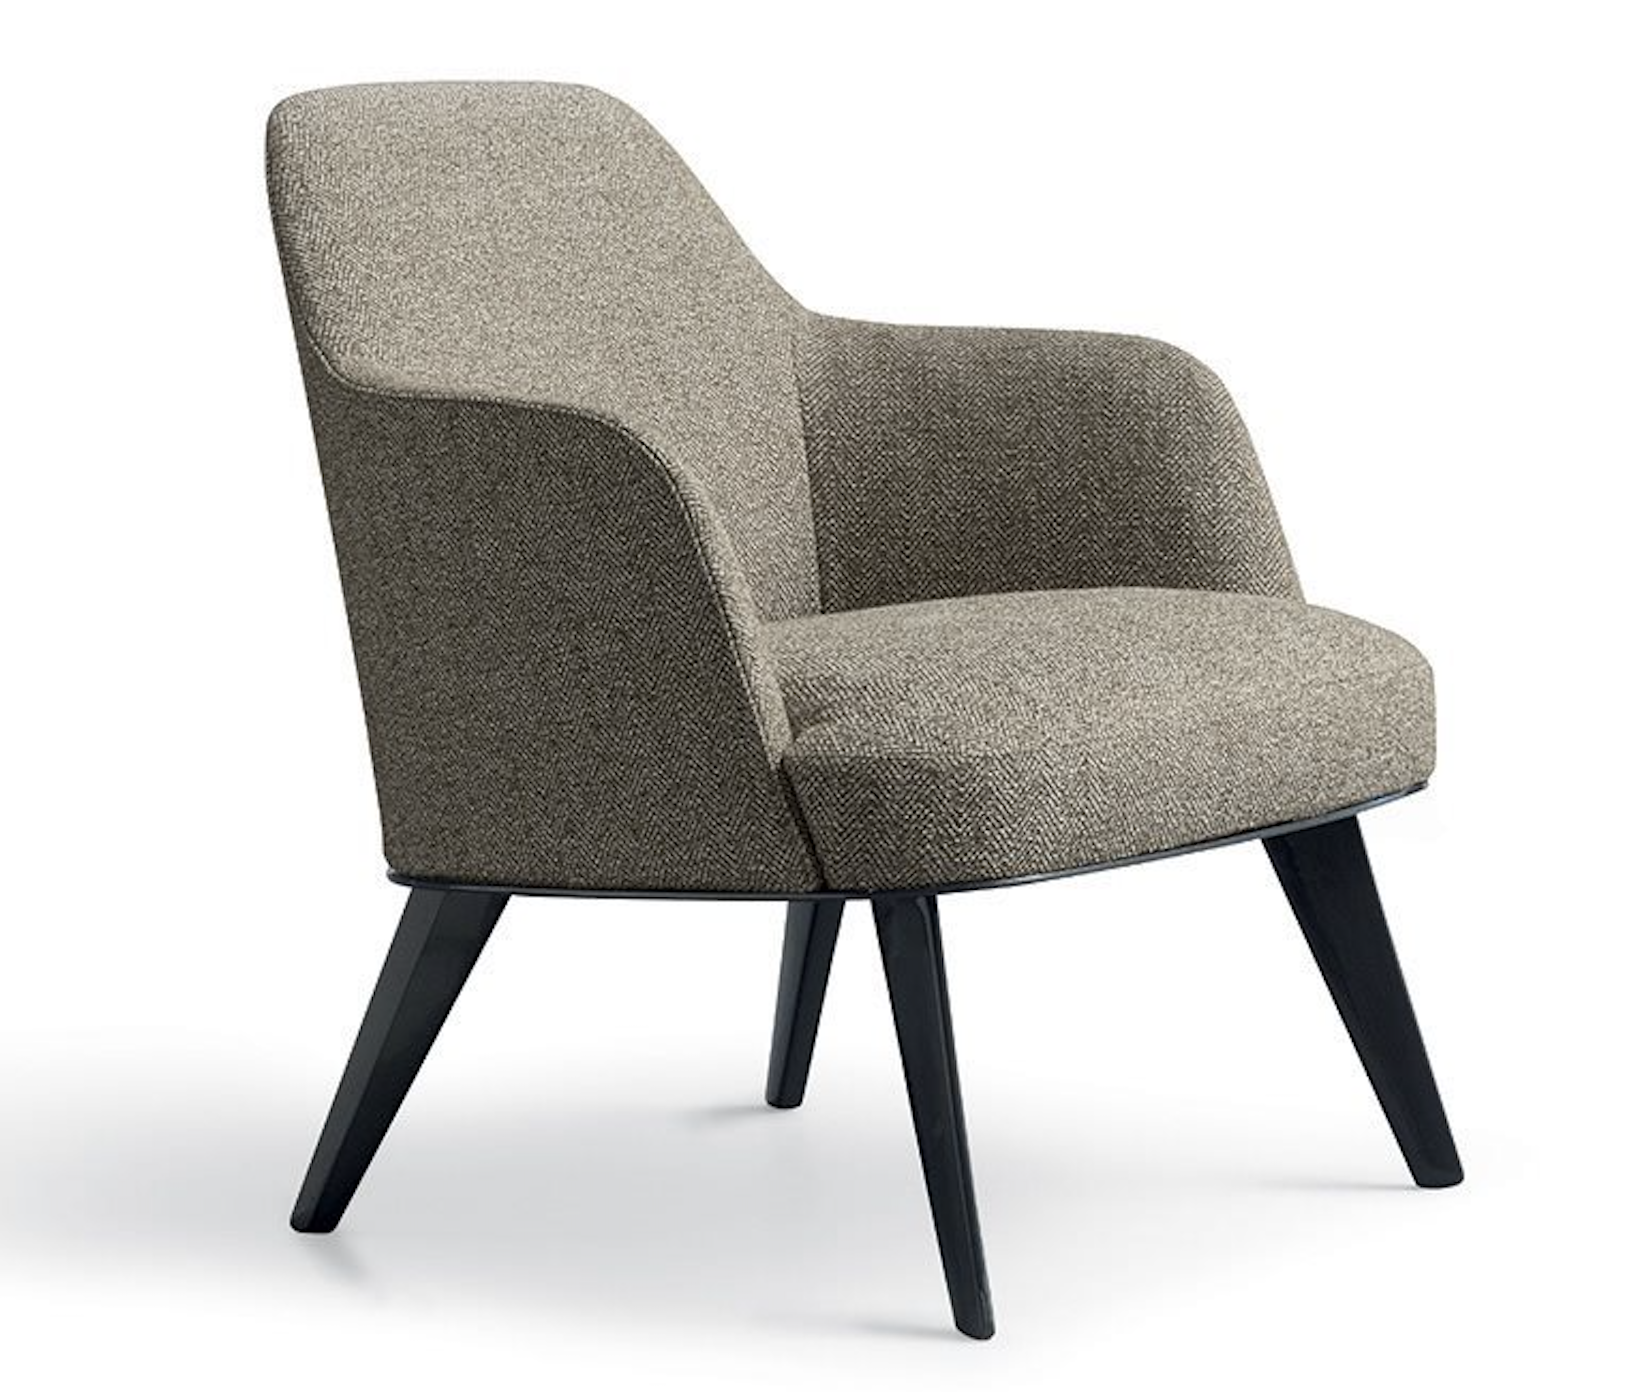 Product Image Jane armchair